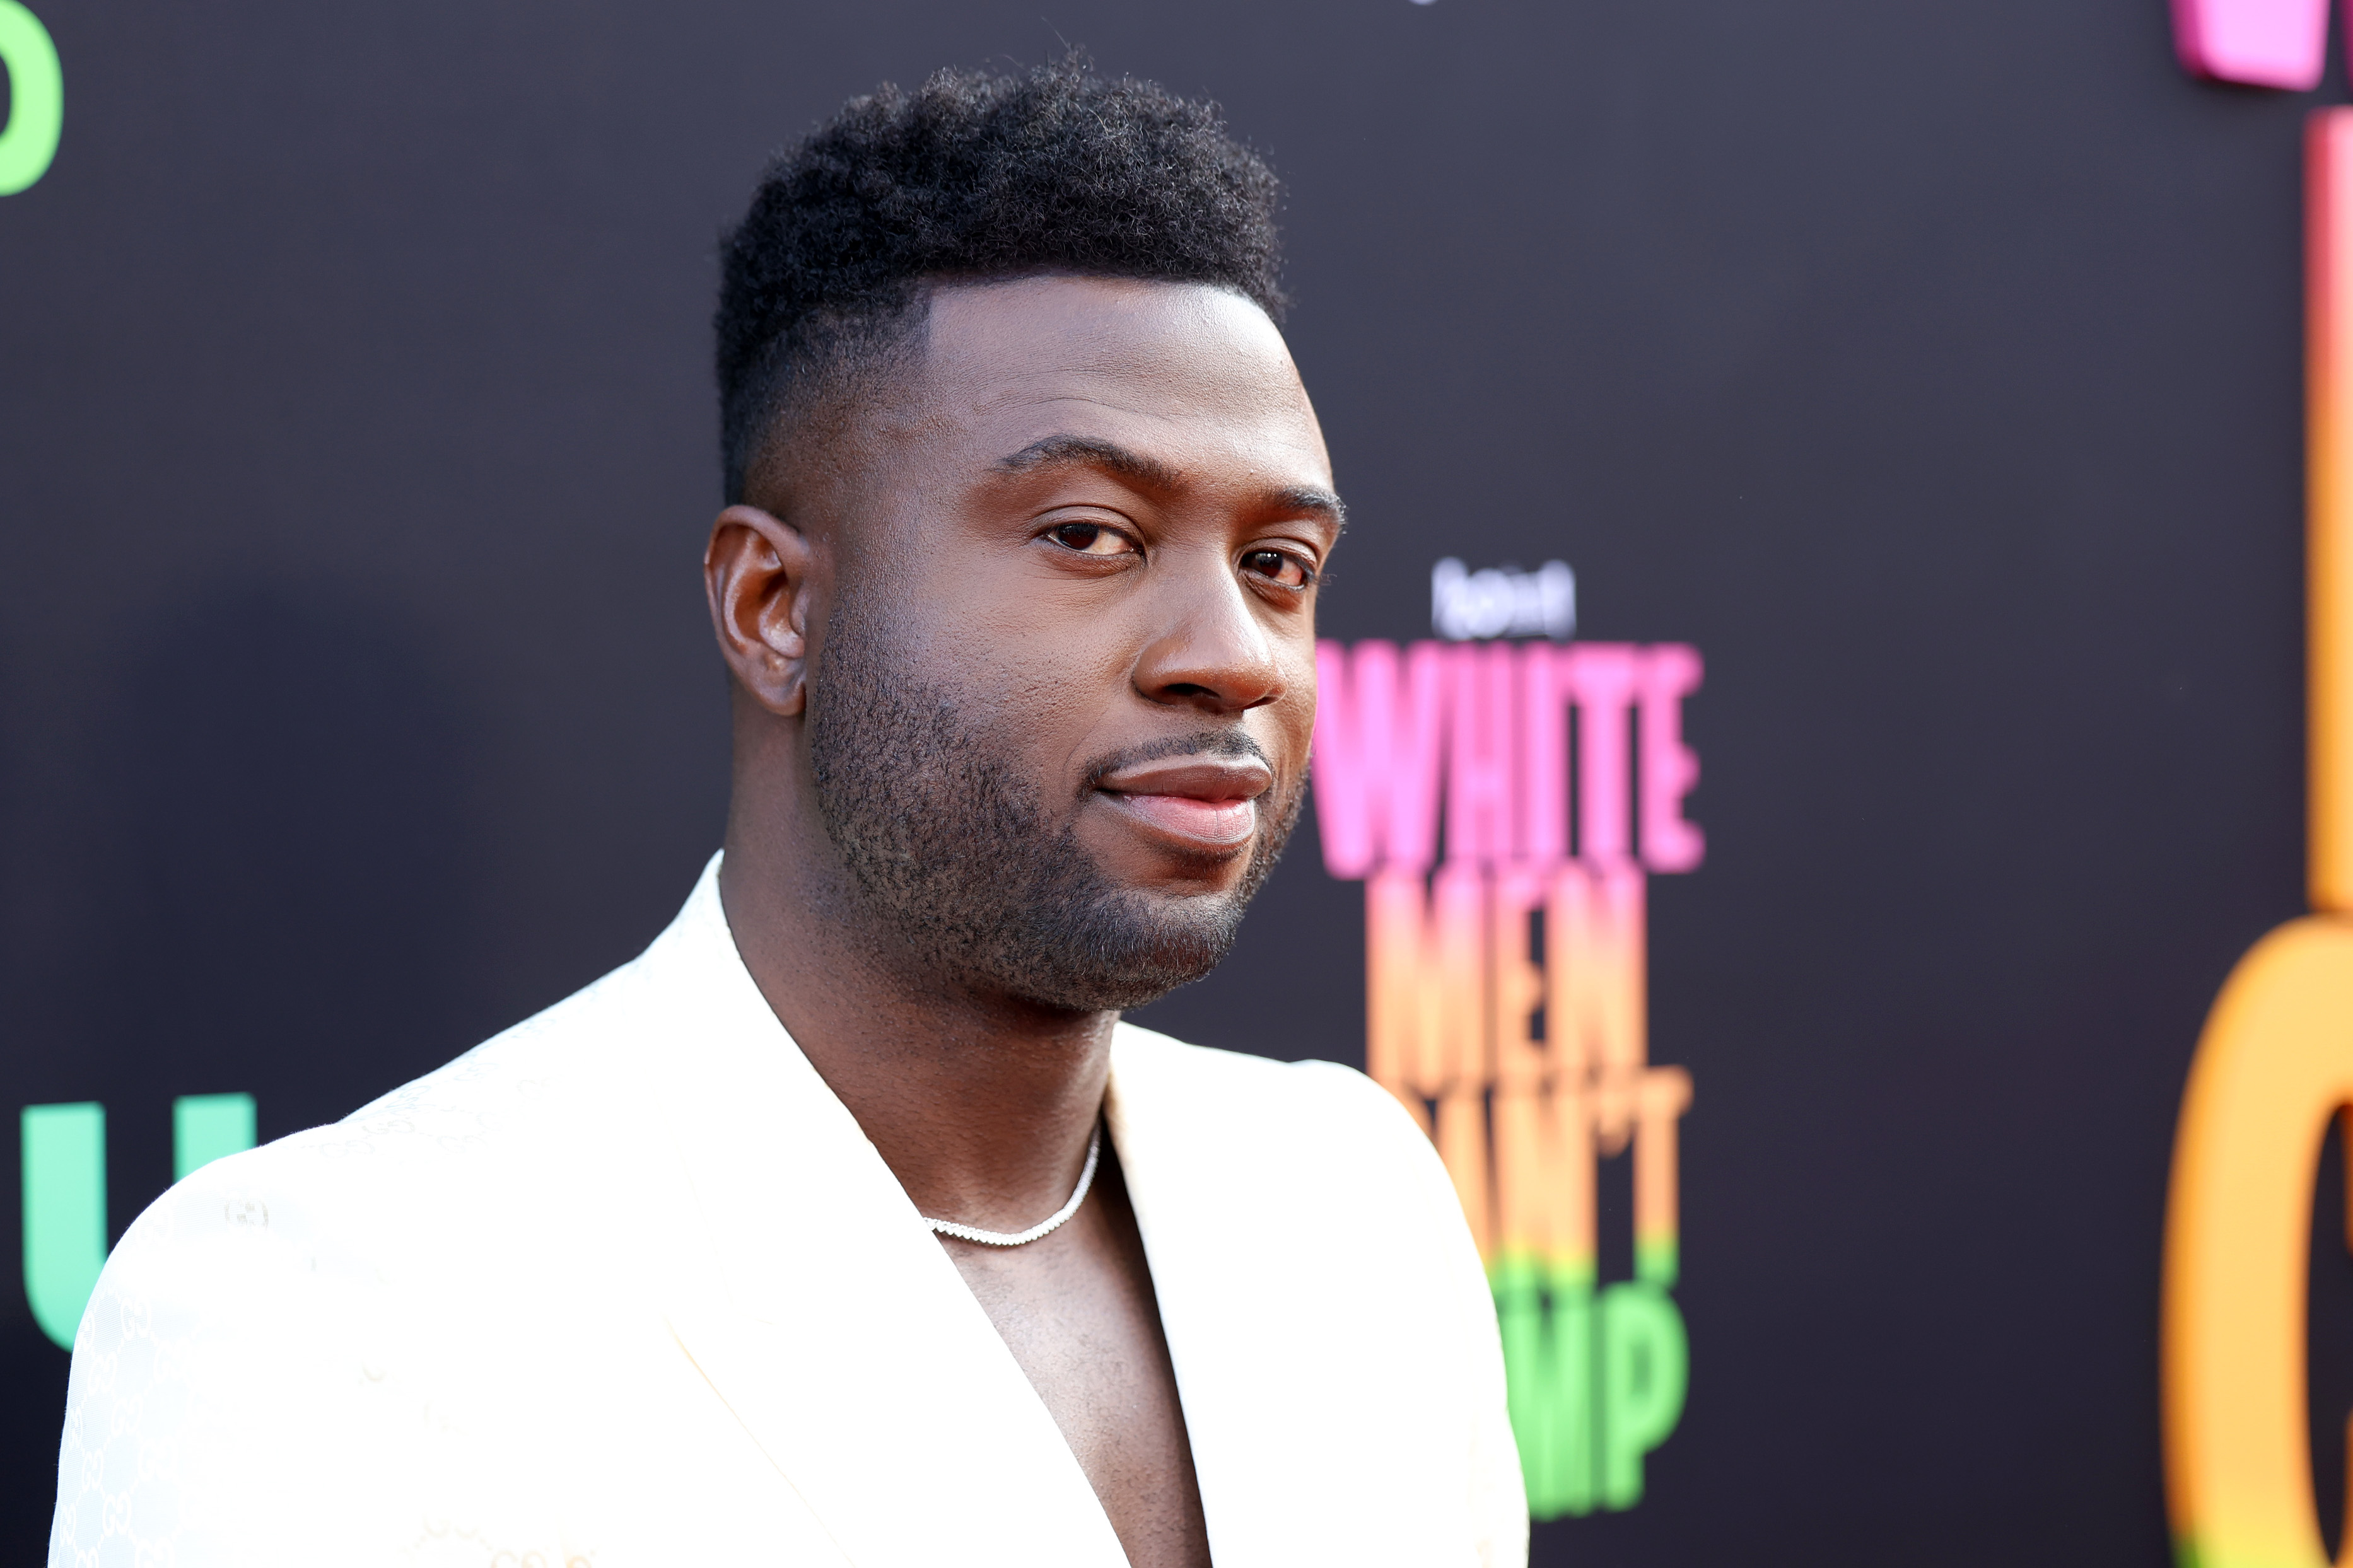 Sinqua Walls at El Capitan Theatre in Hollywood, California on May 11, 2023. | Source: Getty Images